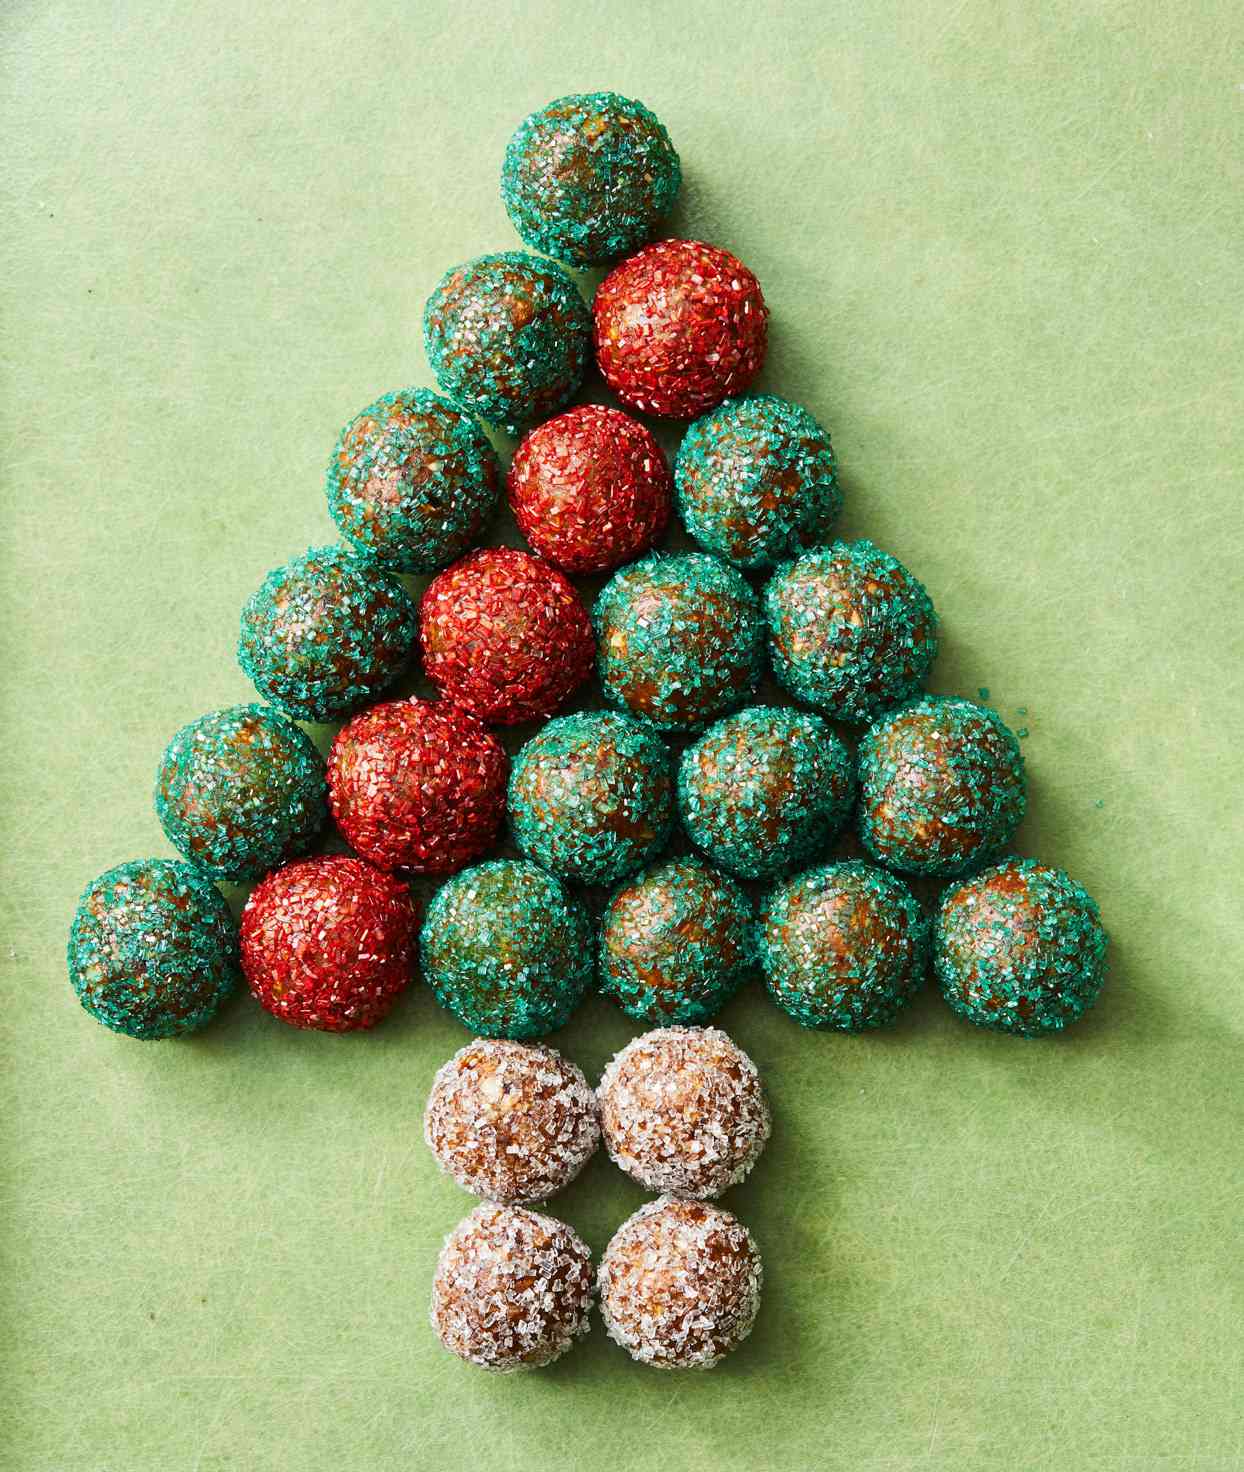 red and green sugar-coated cookies in shape of Christmas tree